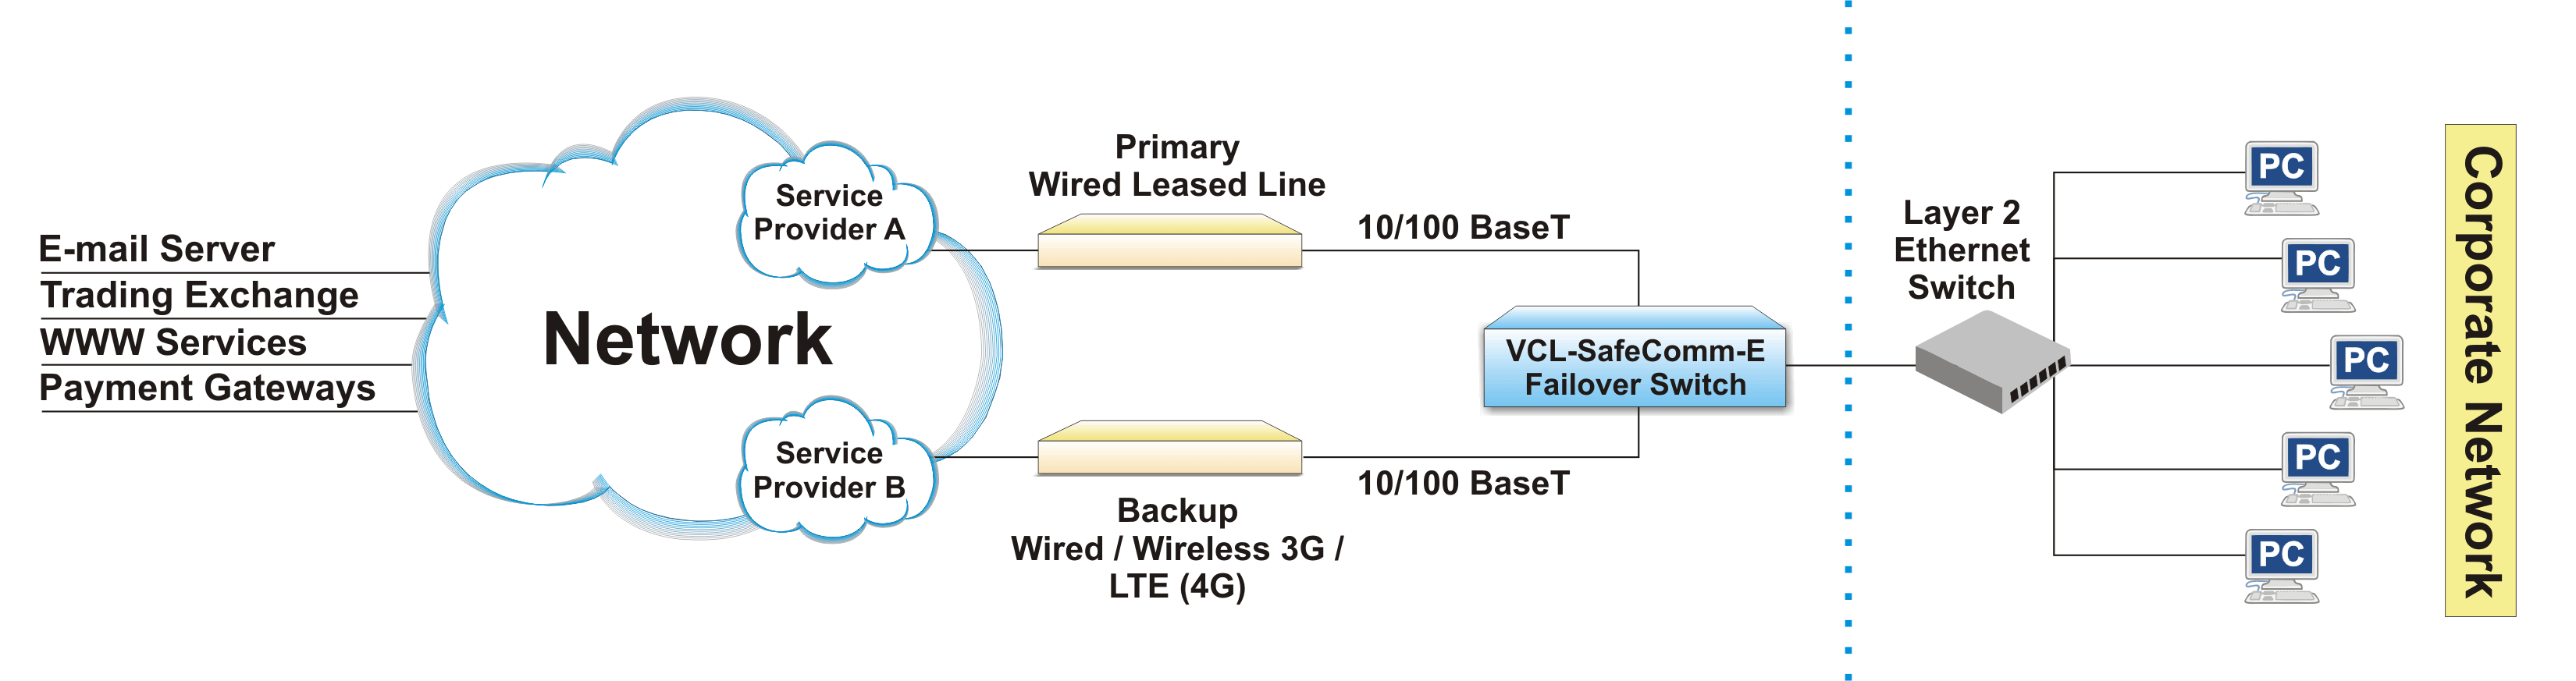 VCL-SafeComm-N providing 1+1 Network Protection